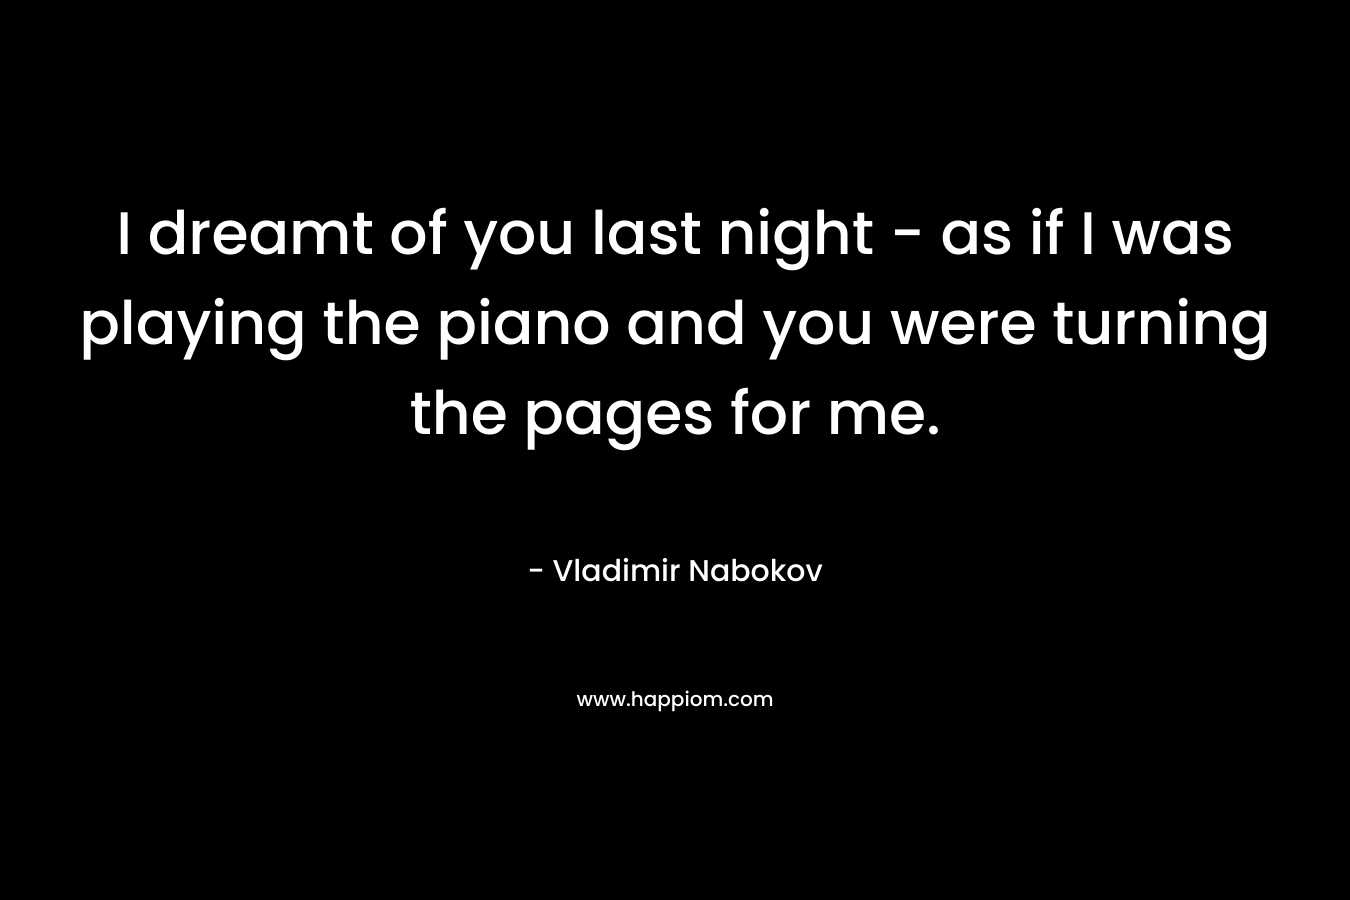 I dreamt of you last night - as if I was playing the piano and you were turning the pages for me.